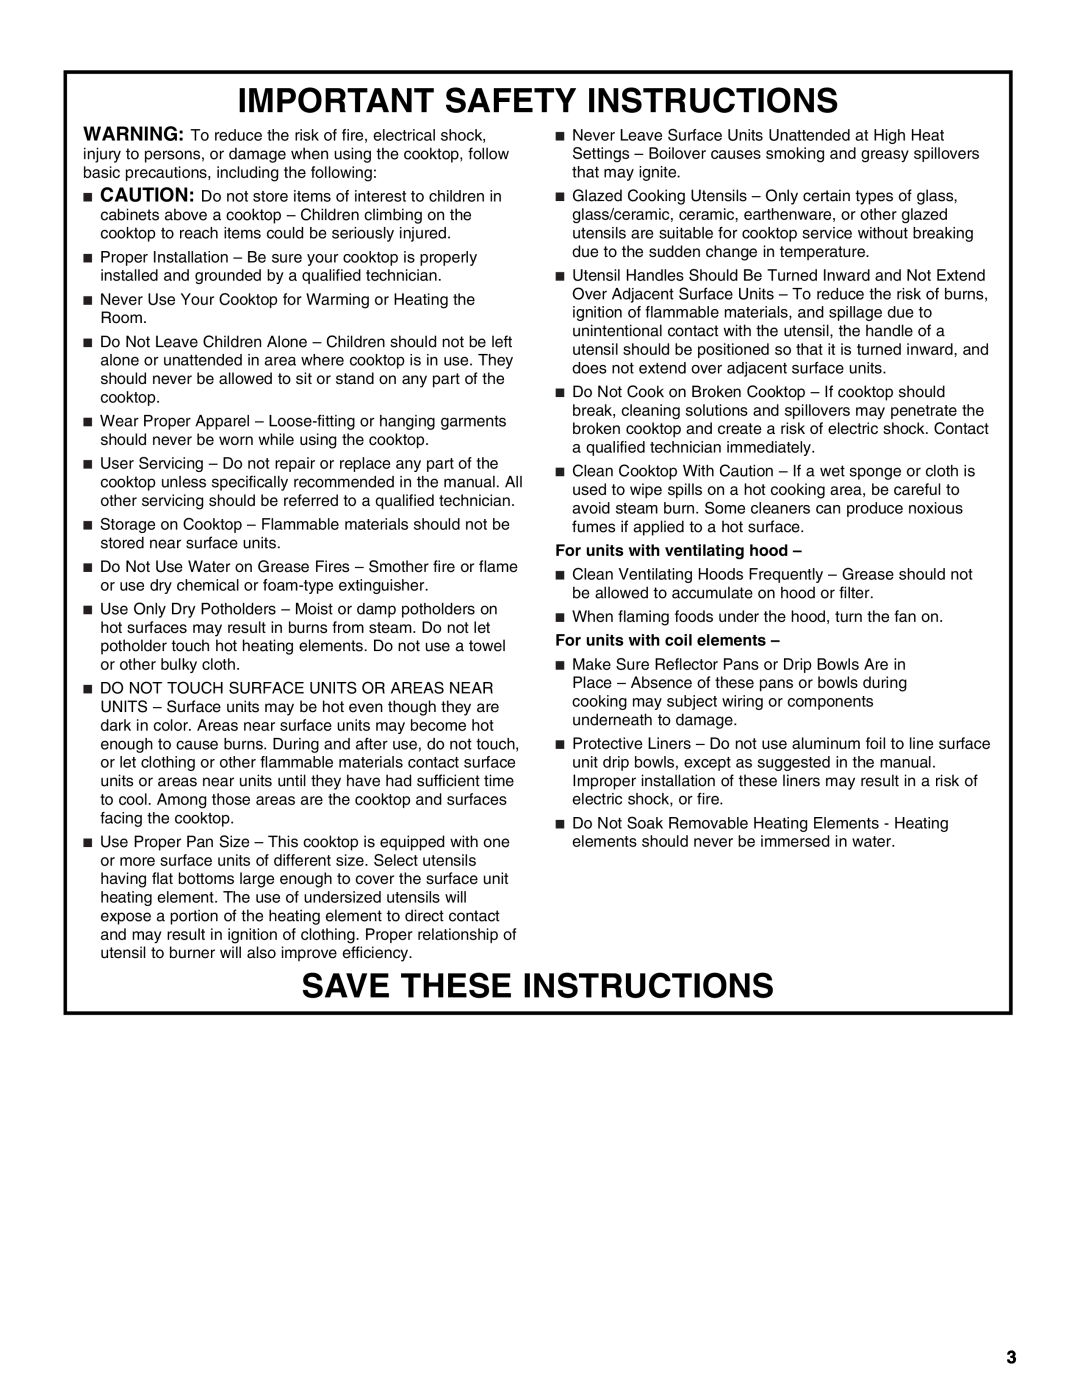 Whirlpool GJD3044L manual Important Safety Instructions, Save These Instructions, For units with ventilating hood 